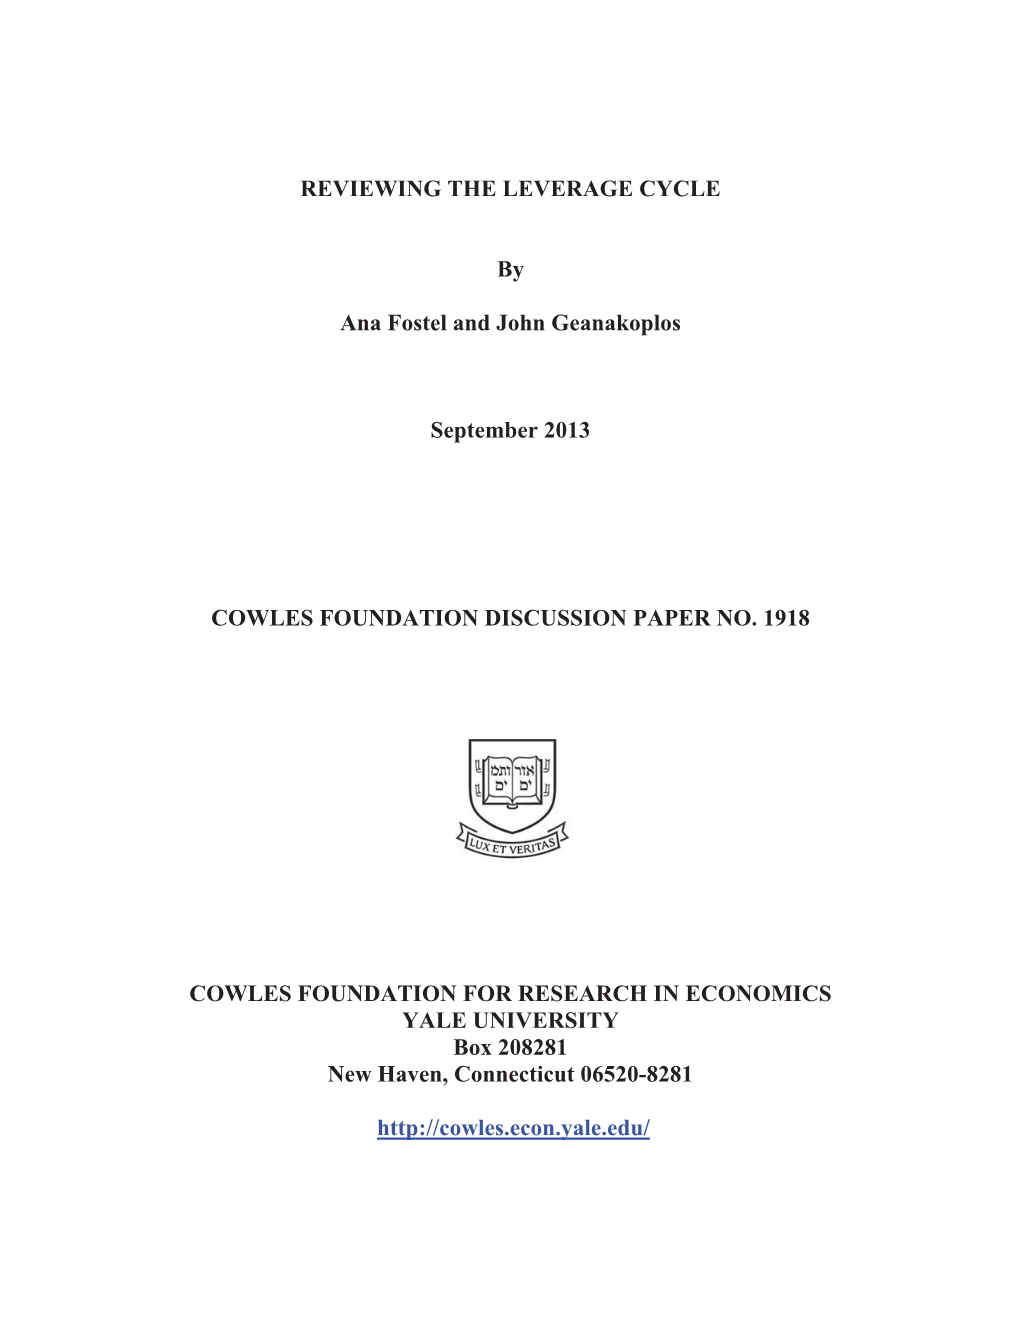 REVIEWING the LEVERAGE CYCLE by Ana Fostel and John Geanakoplos September 2013 COWLES FOUNDATION DISCUSSION PAPER NO. 1918 COWLE